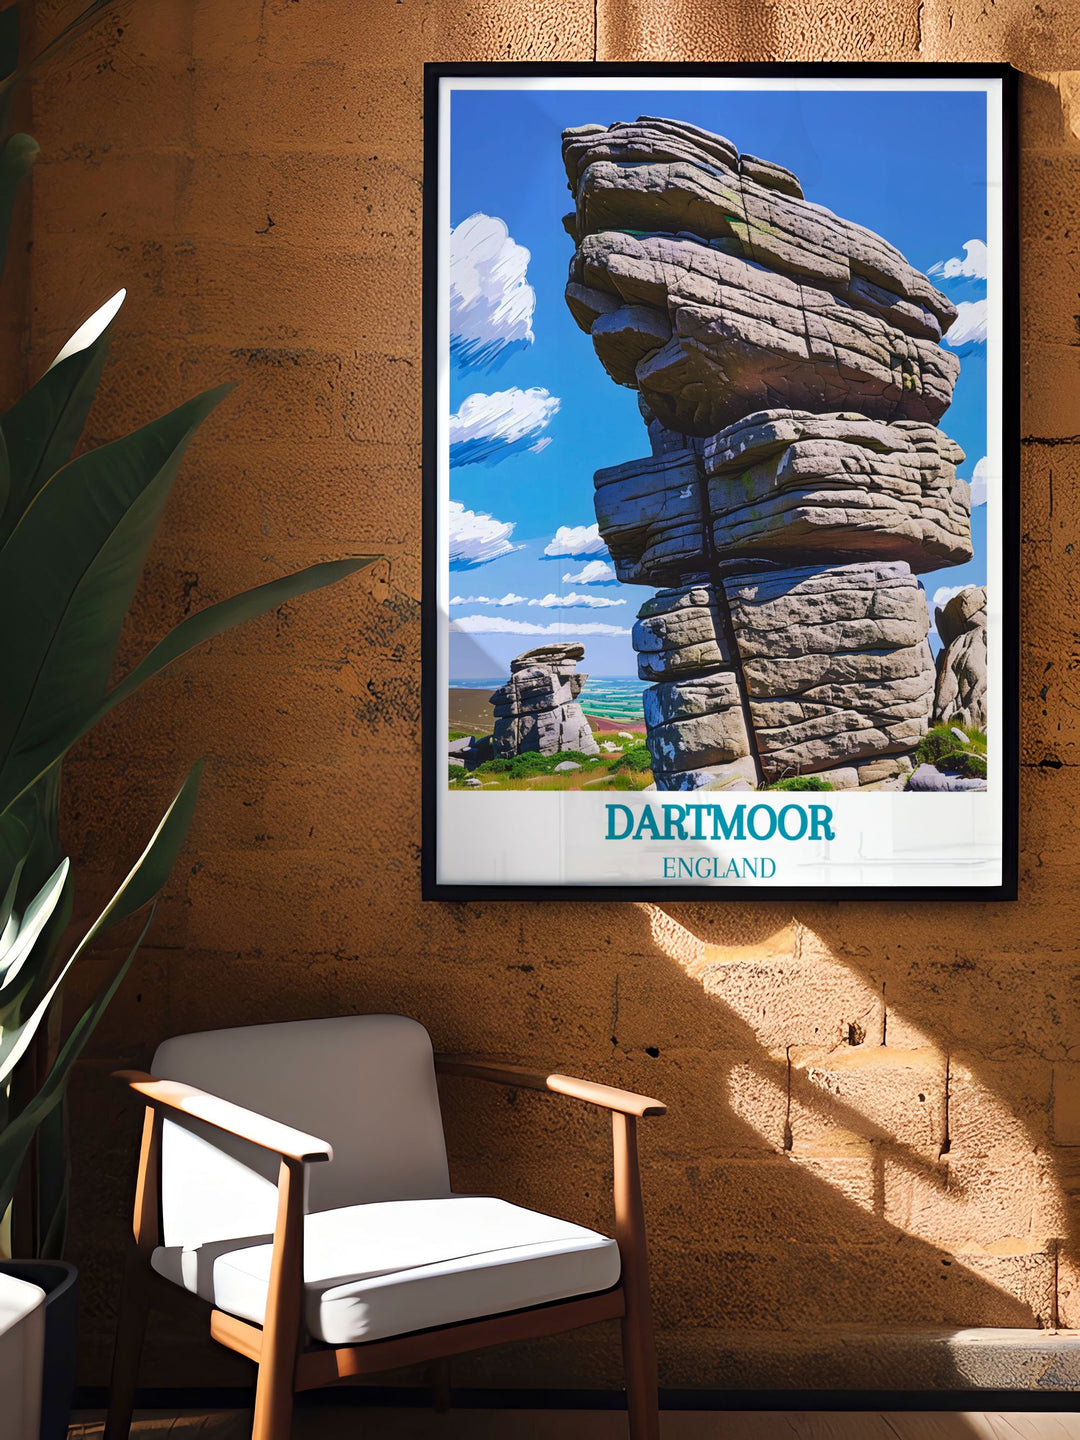 Travel poster featuring the iconic tors of Dartmoor, highlighting their majestic beauty and panoramic views over Devons landscape.